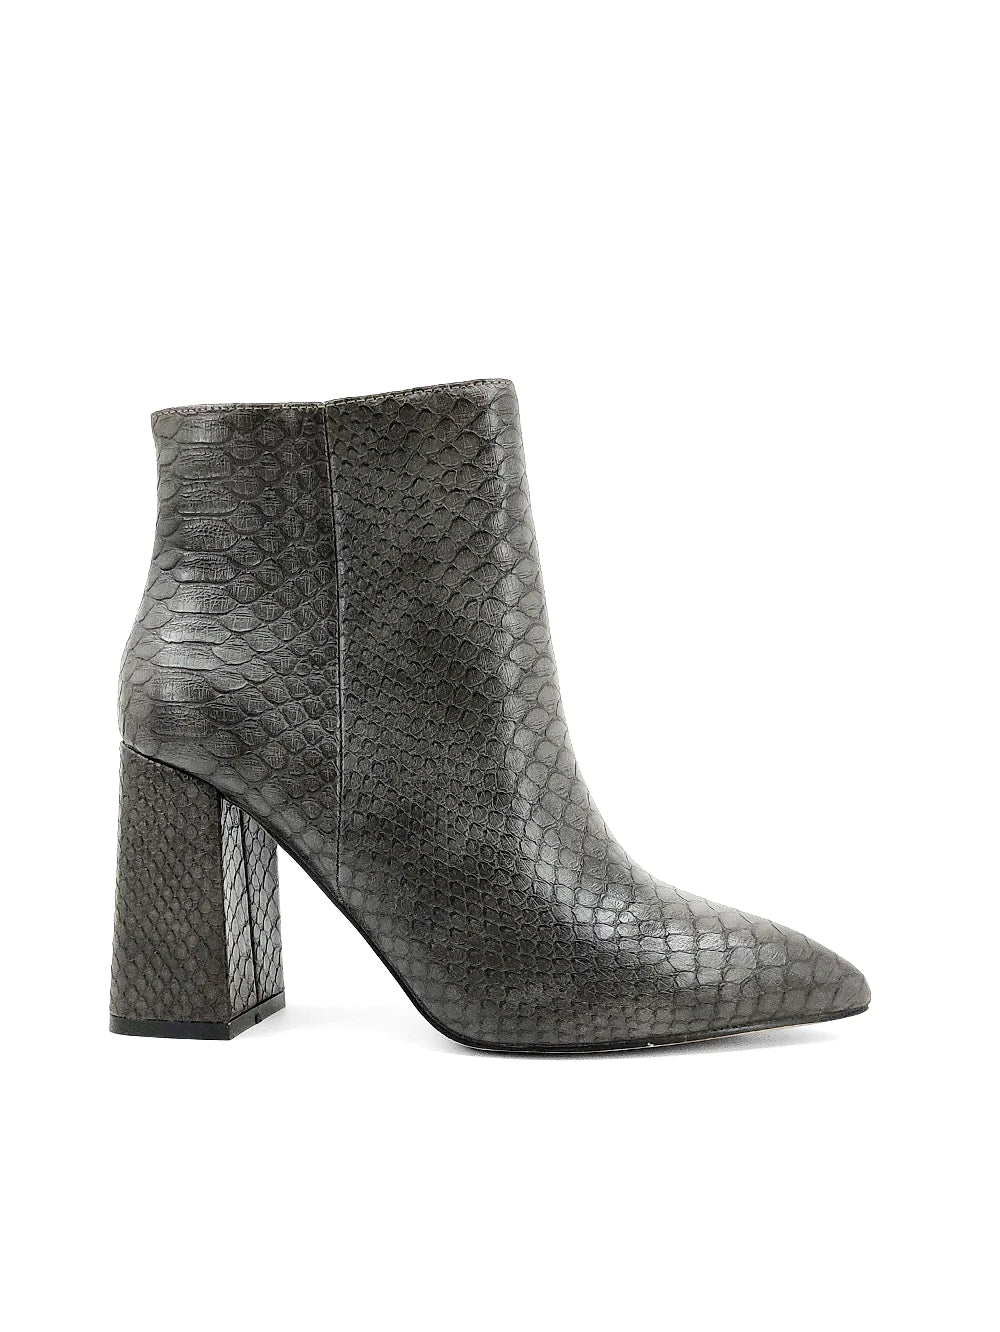 Veronica Boots in Grey Snake